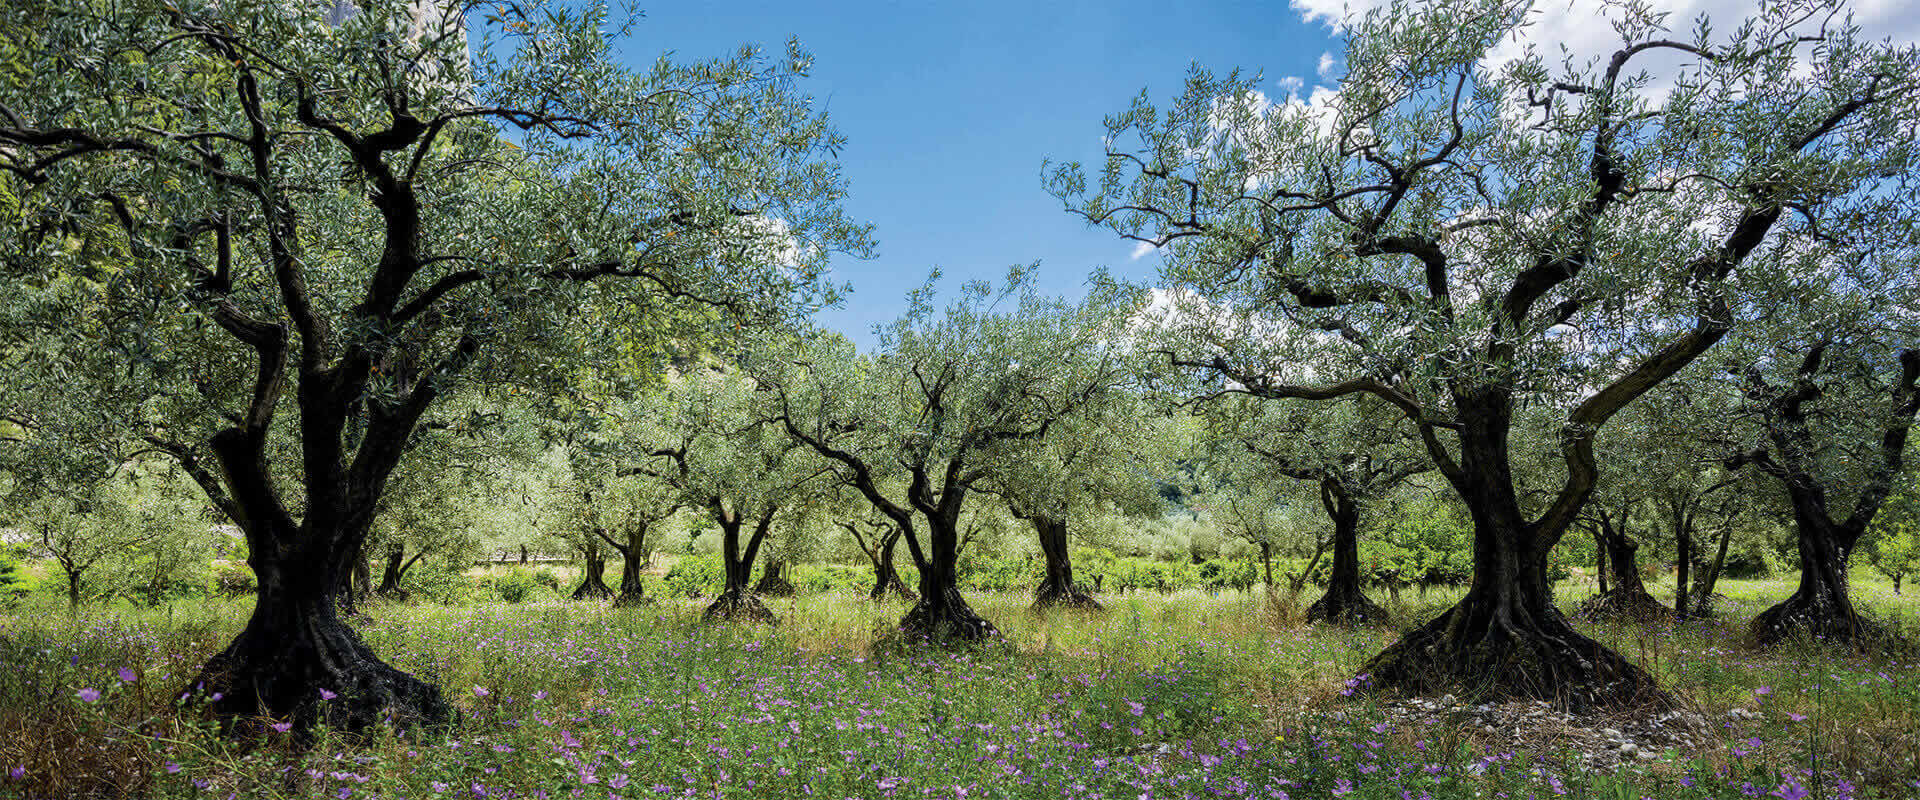 Growing an olive tree – Fratelli Carli